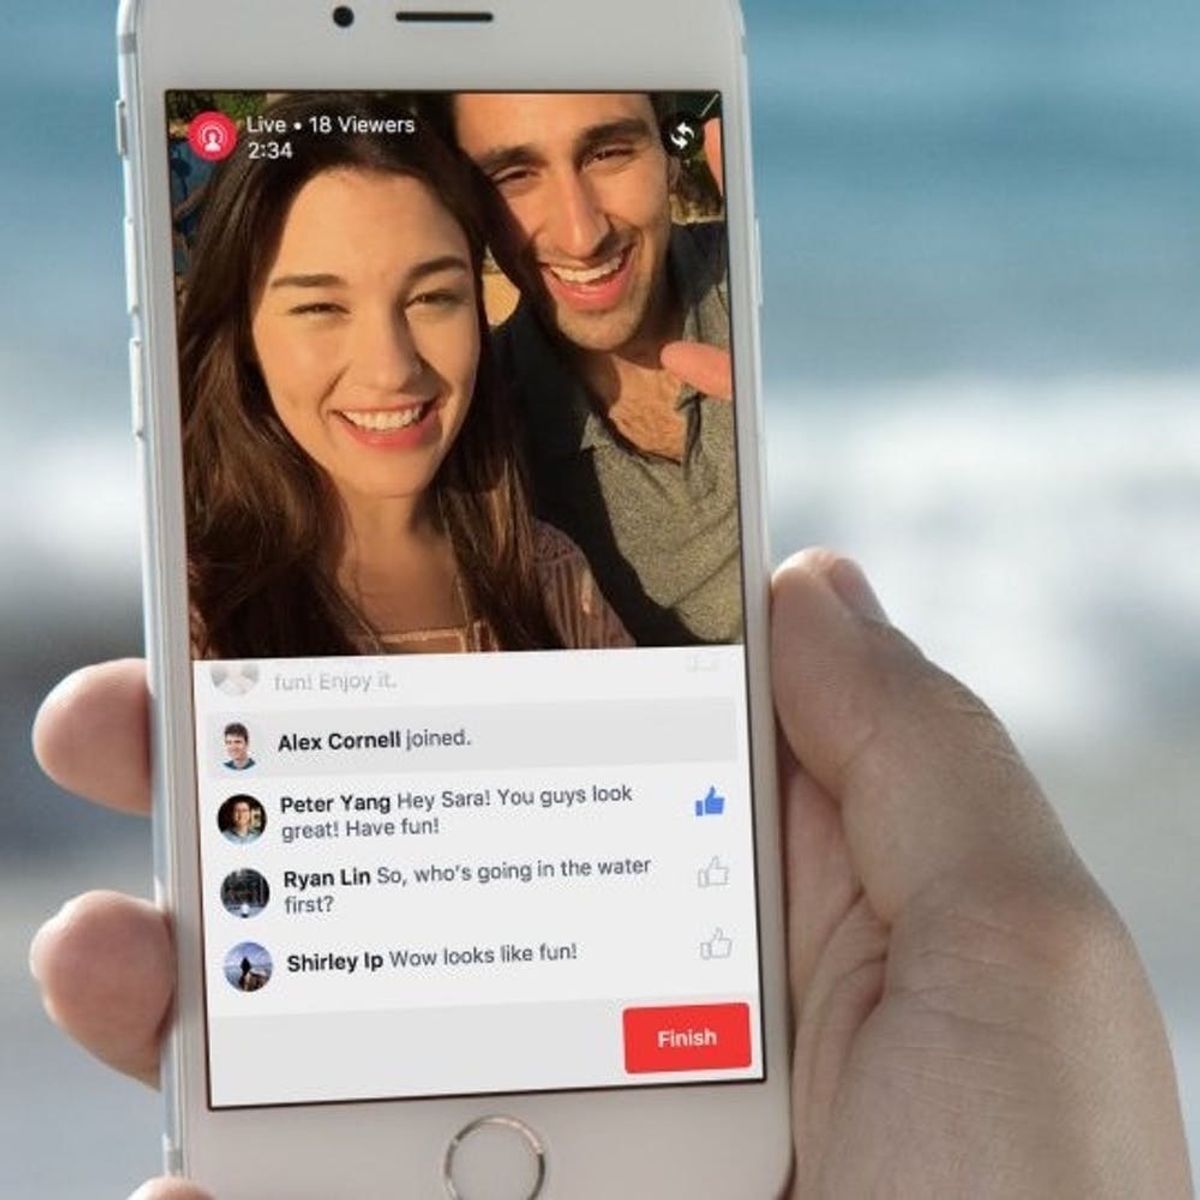 Facebook’s New Video Feature Is Going to End FOMO